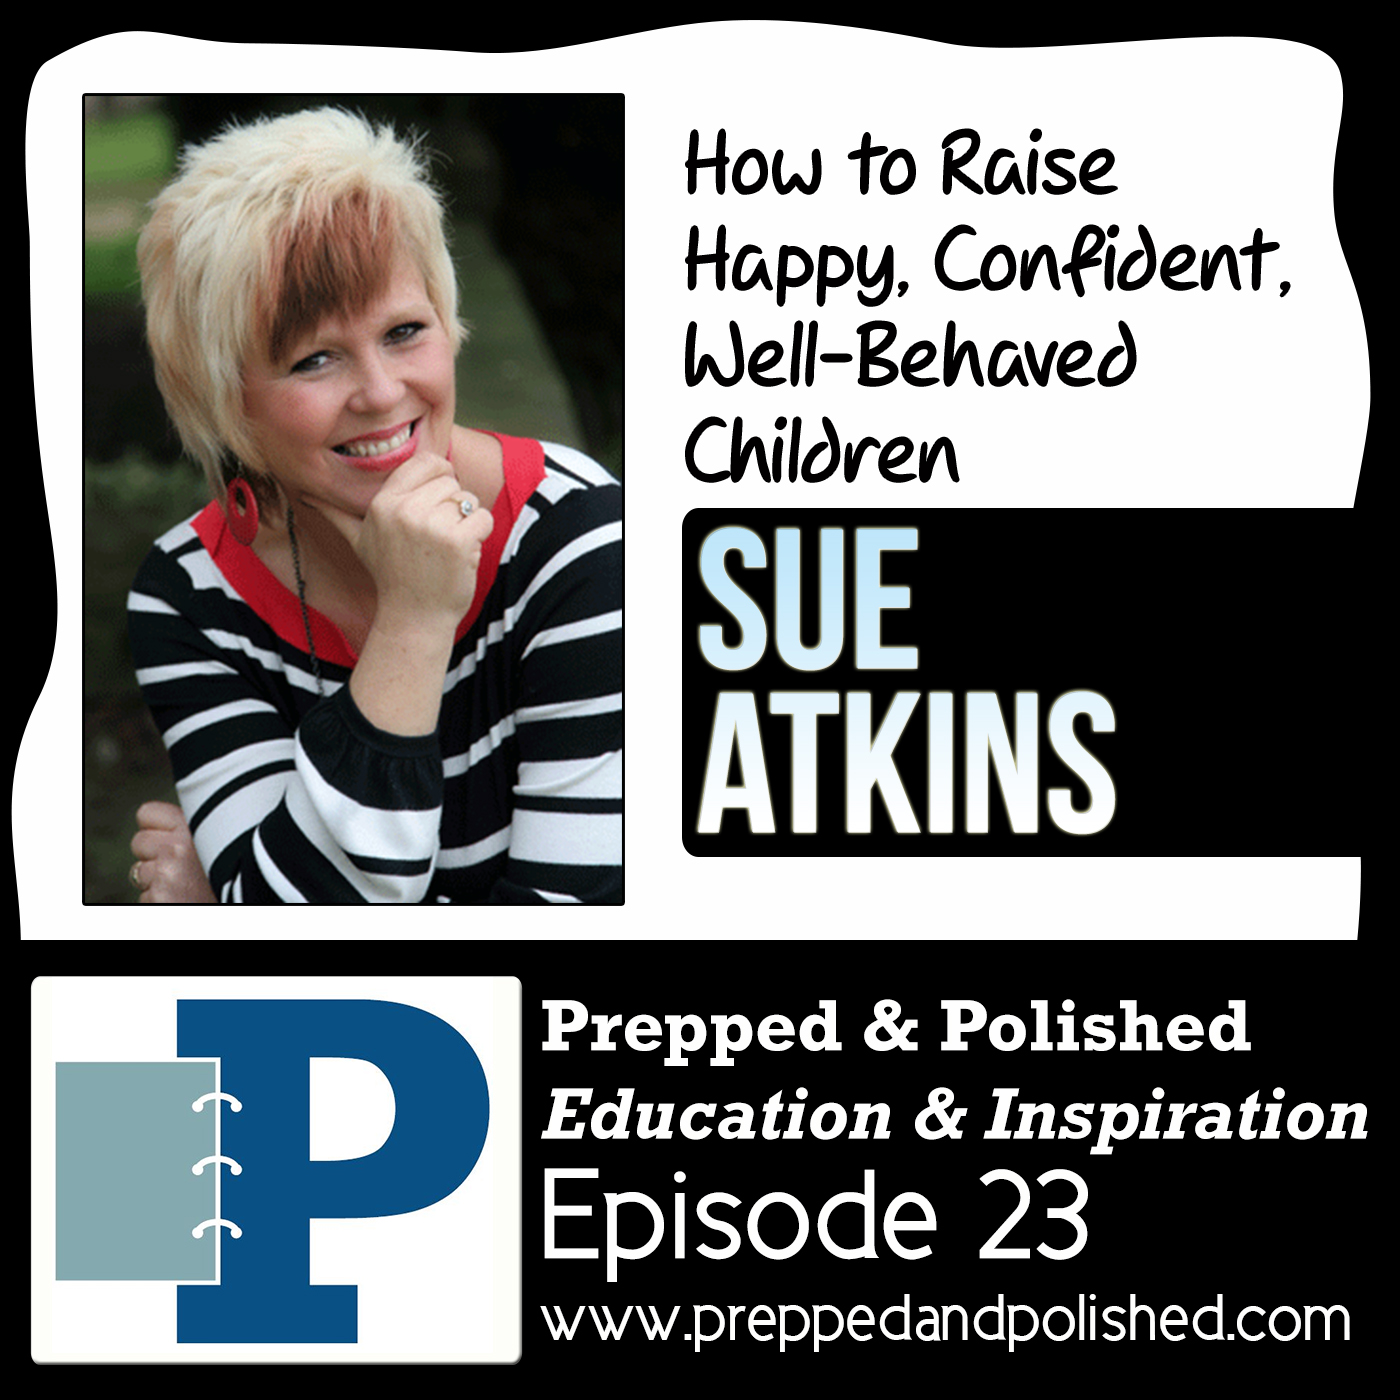 Sue Atkins - How to Raise Happy, Confident, Well-Behaved Children